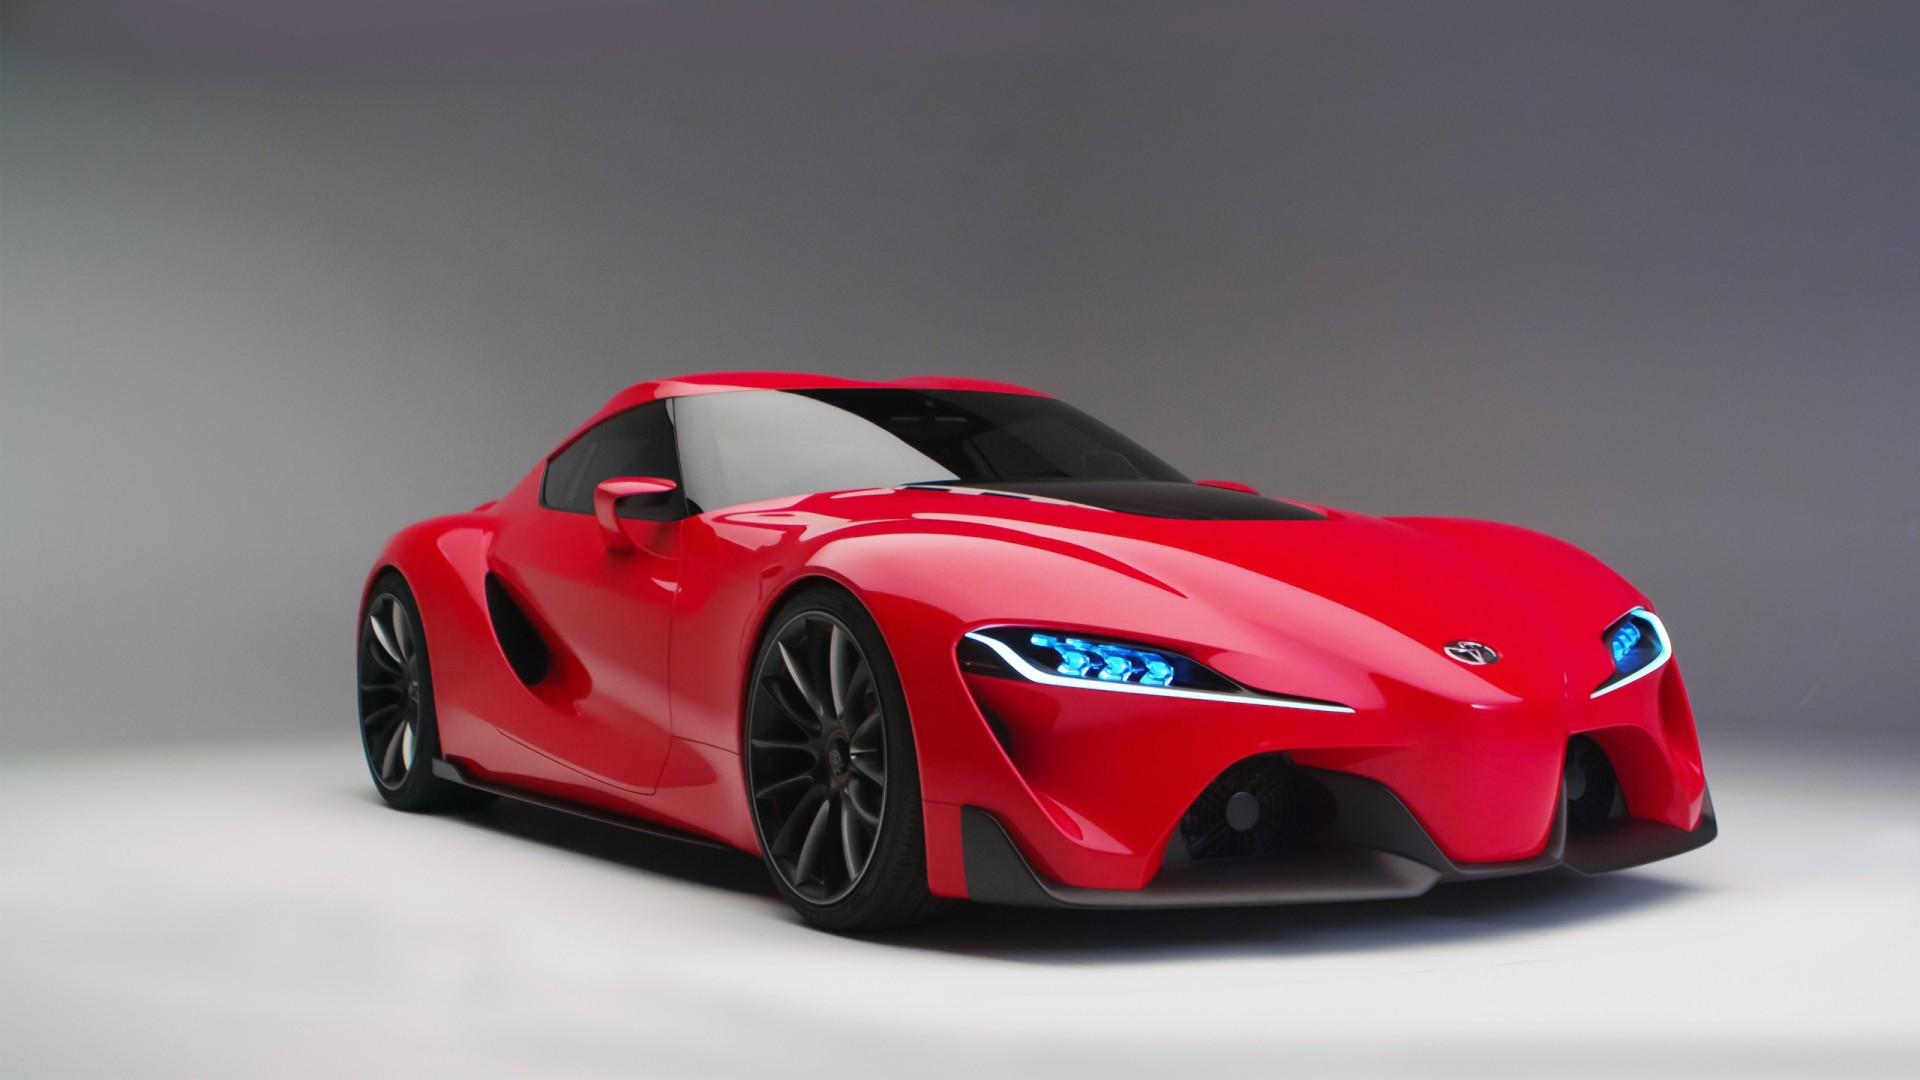 2016 Toyota FT1 Concept Wallpaper | HD Car Wallpapers | ID ...